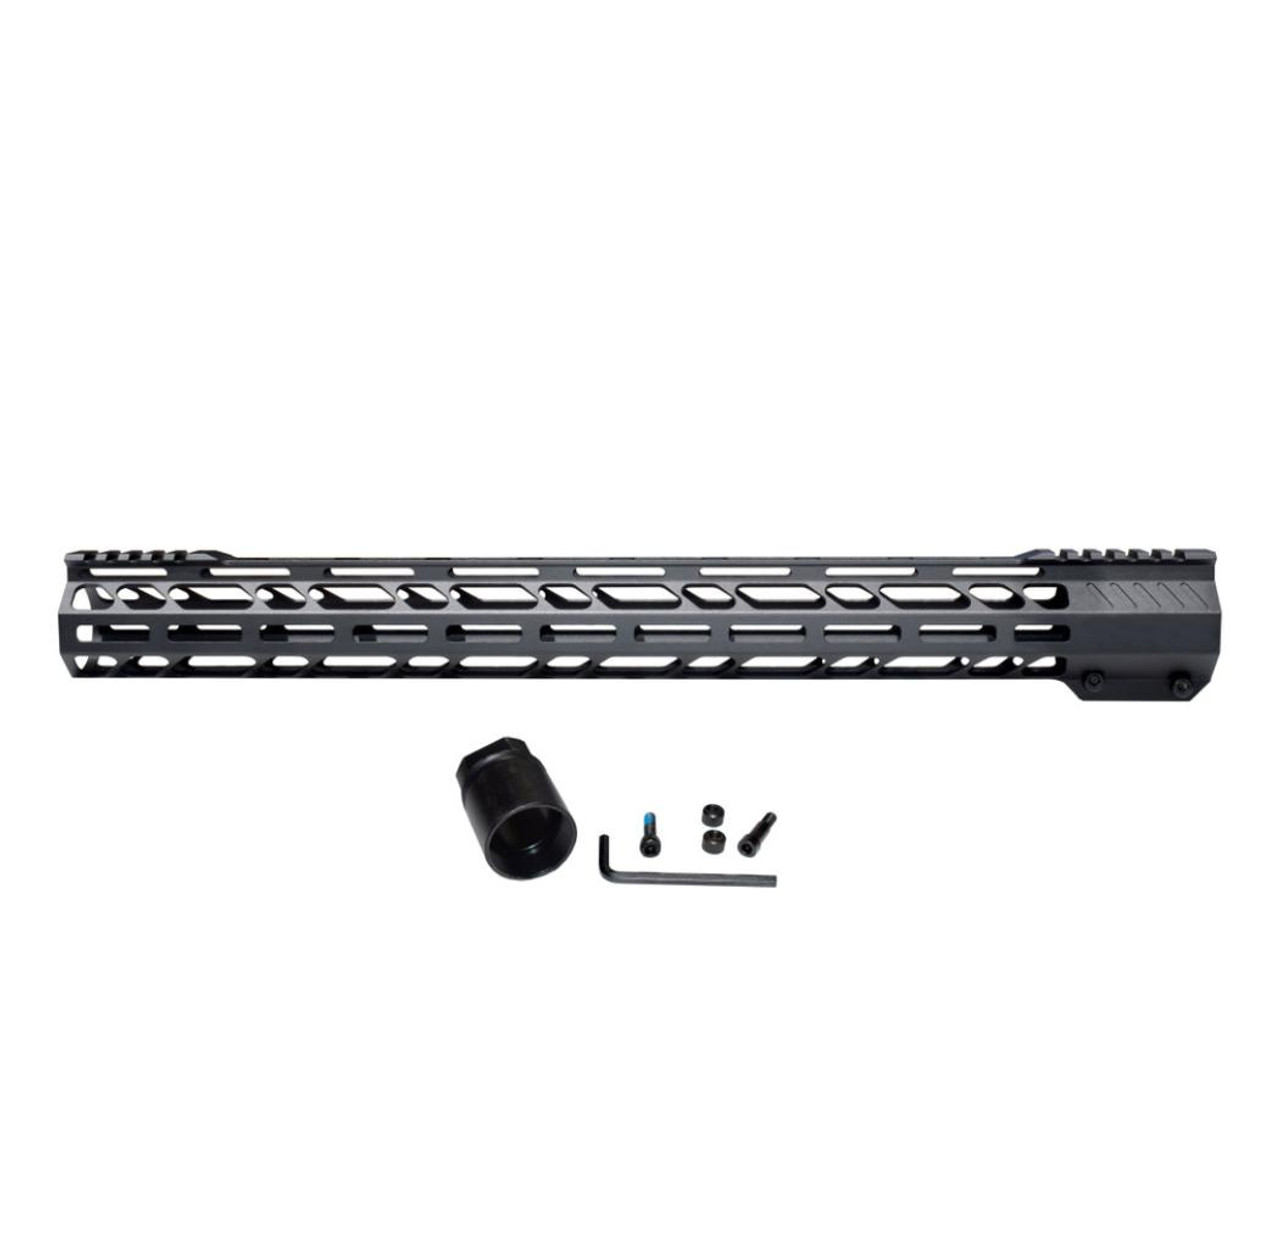 MCS Lightweight M-LOK Free Float Handguard for 308 Low Profile Uppers, 19.5" 